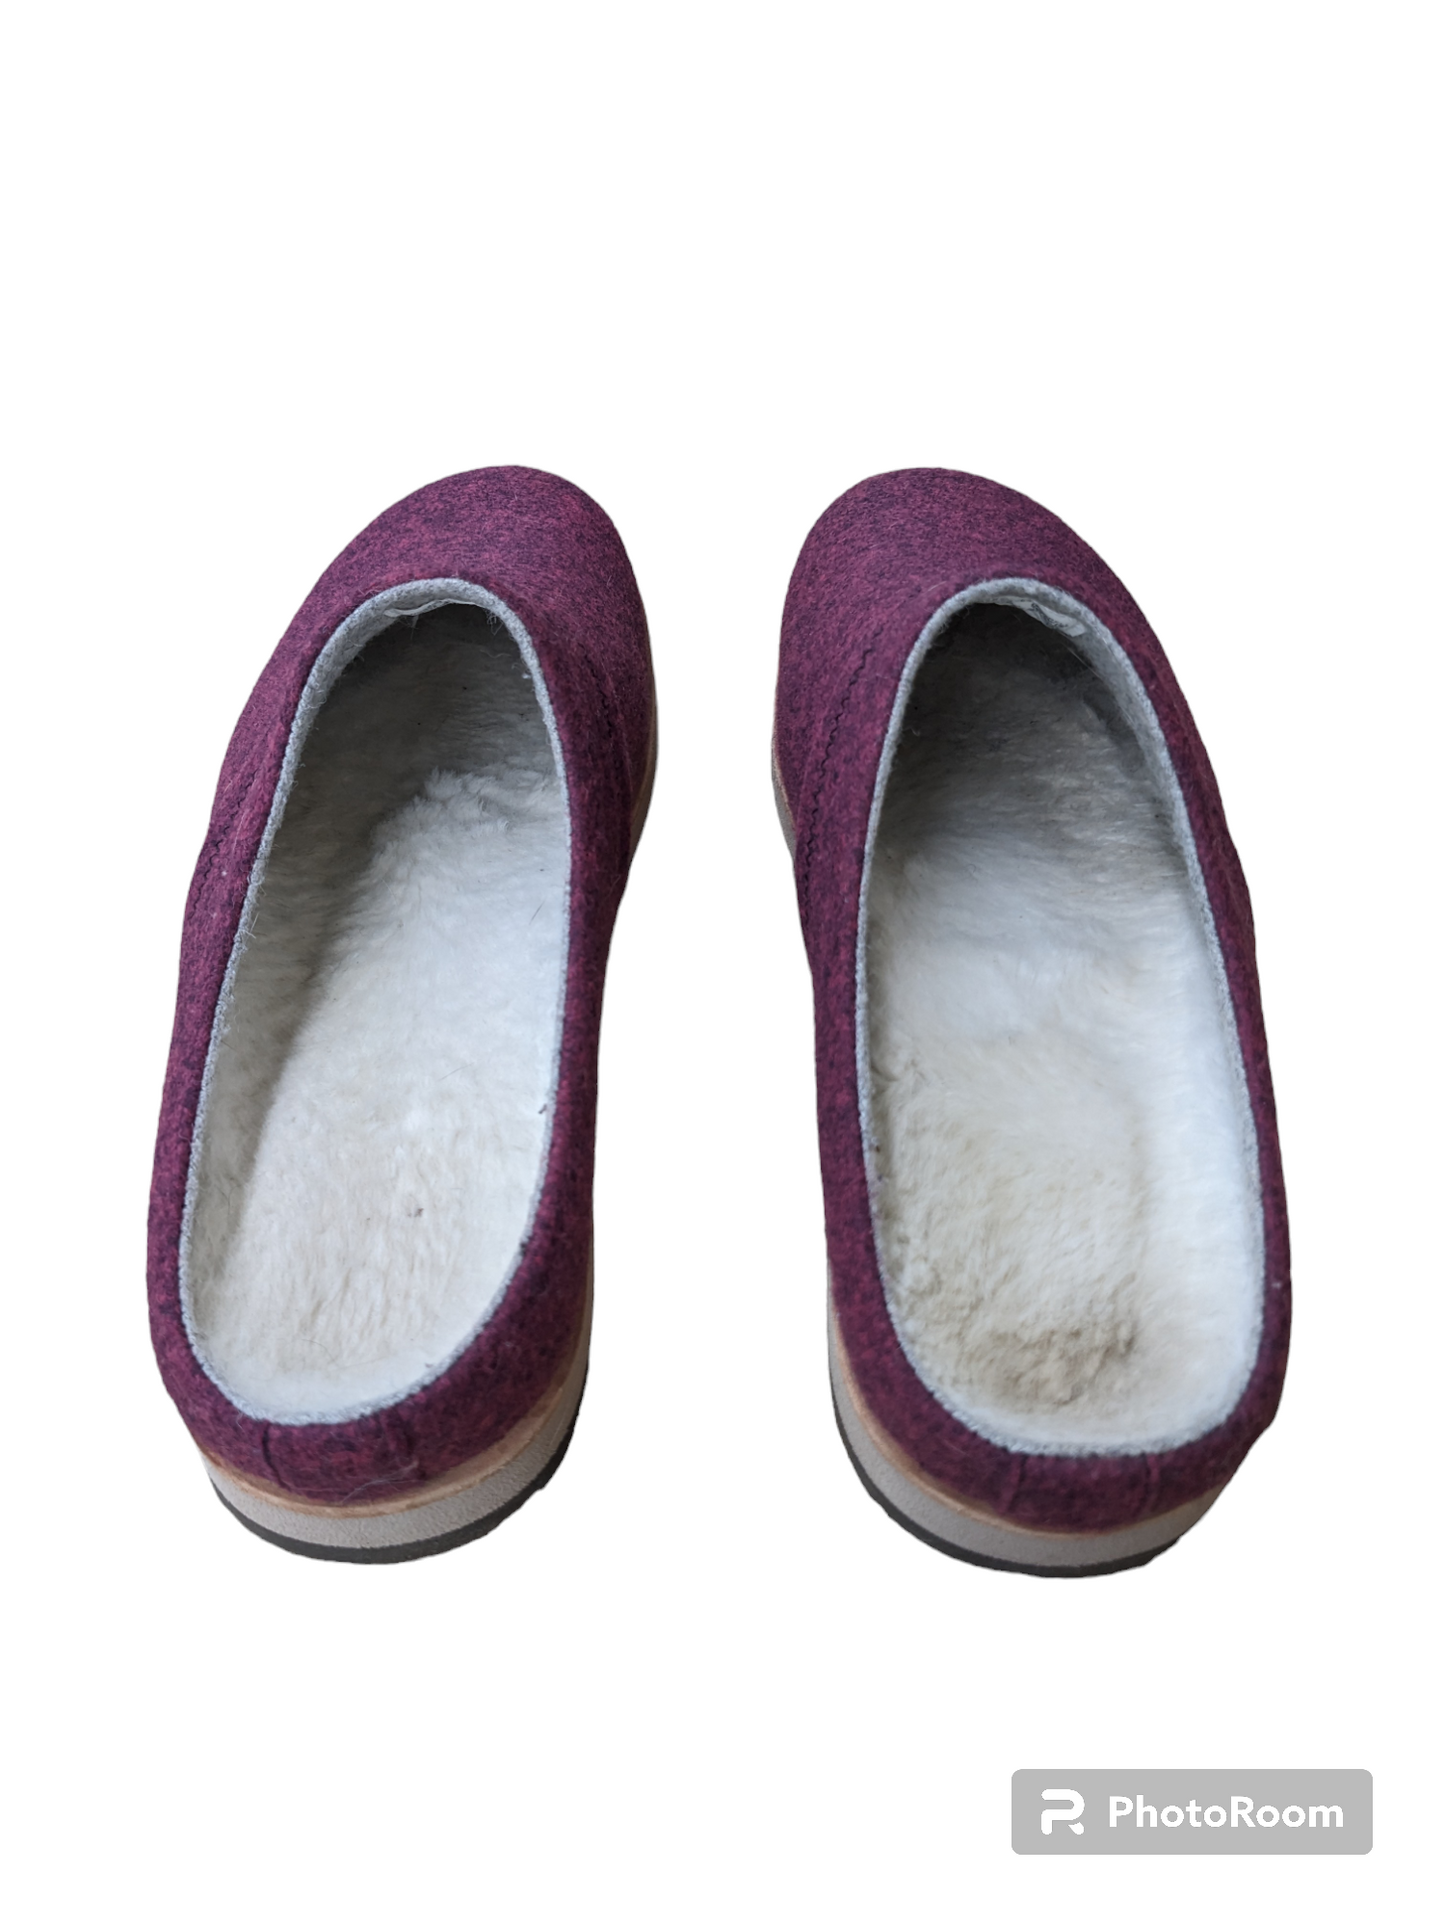 Shoes Flats Mule And Slide By Merrell  Size: 8.5